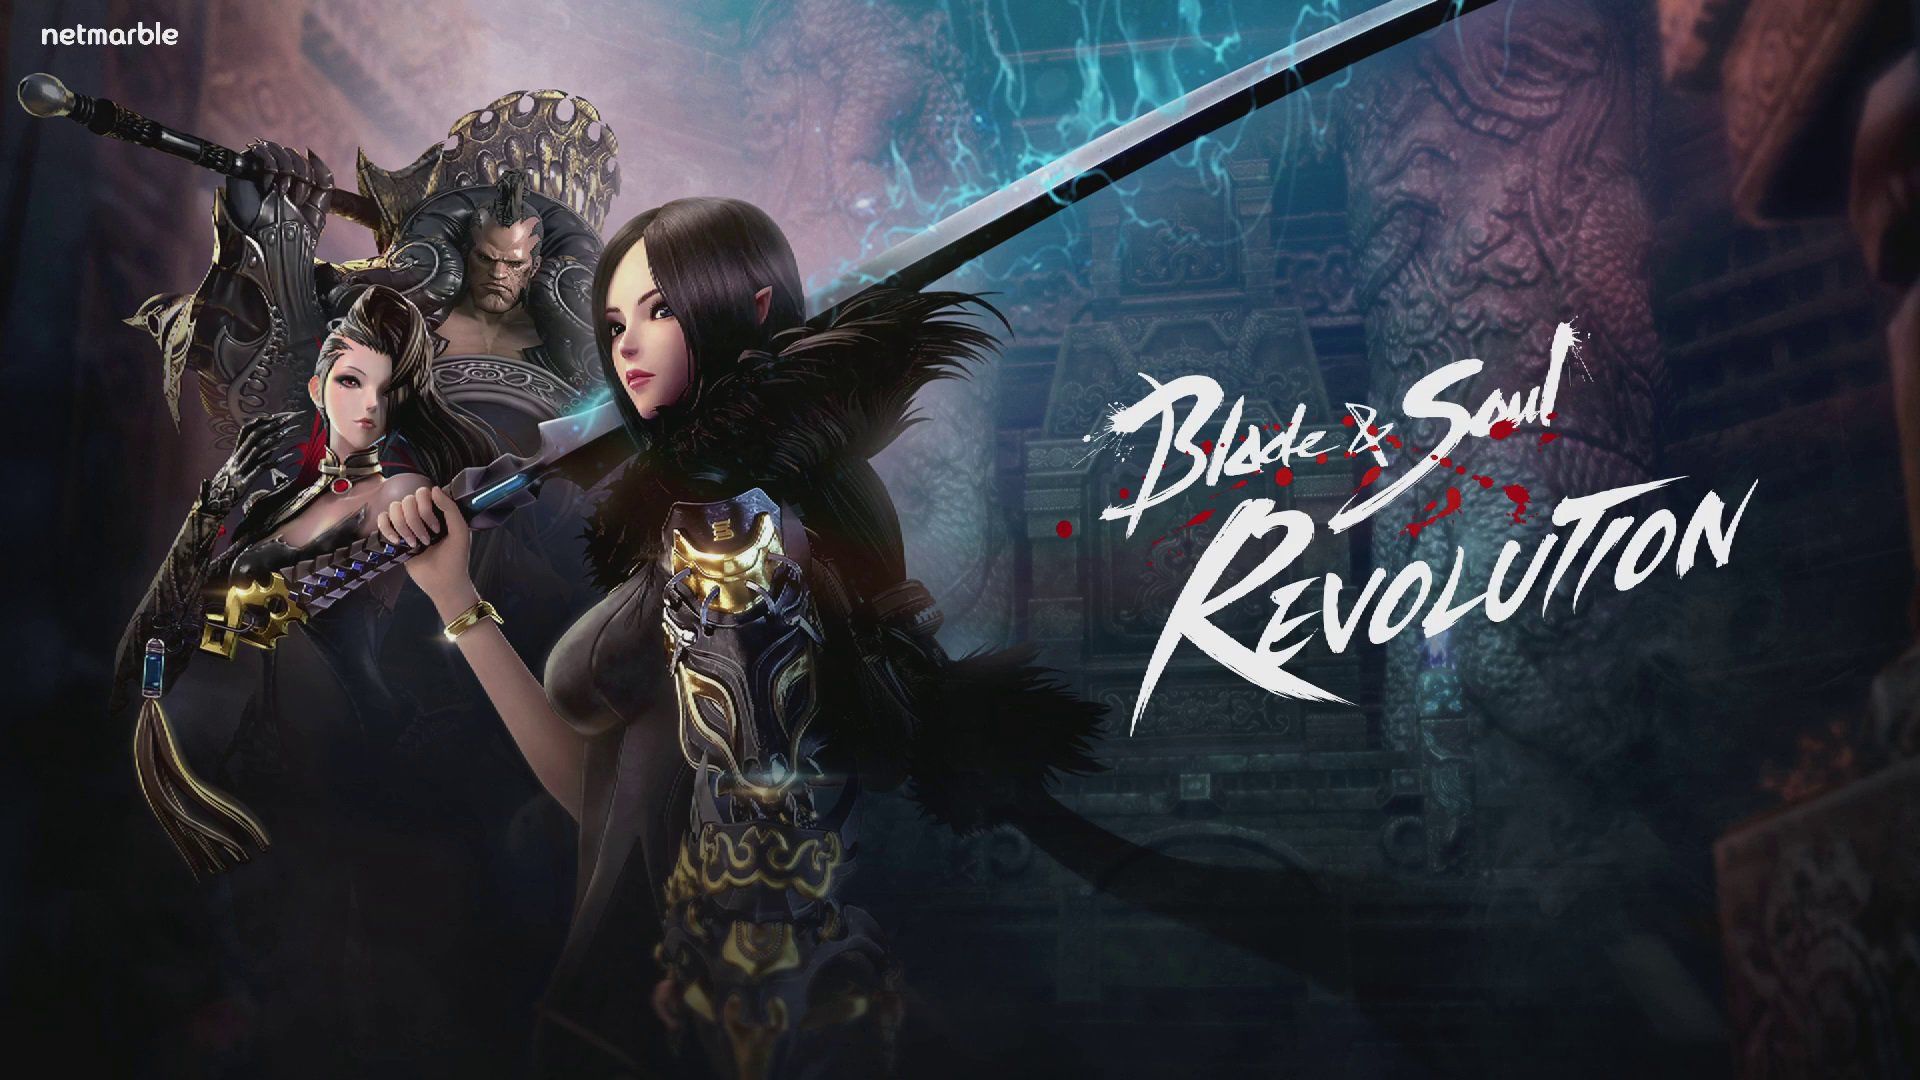 Blade and Soul Revolution’s Faction War Revolutionary Update Is Here